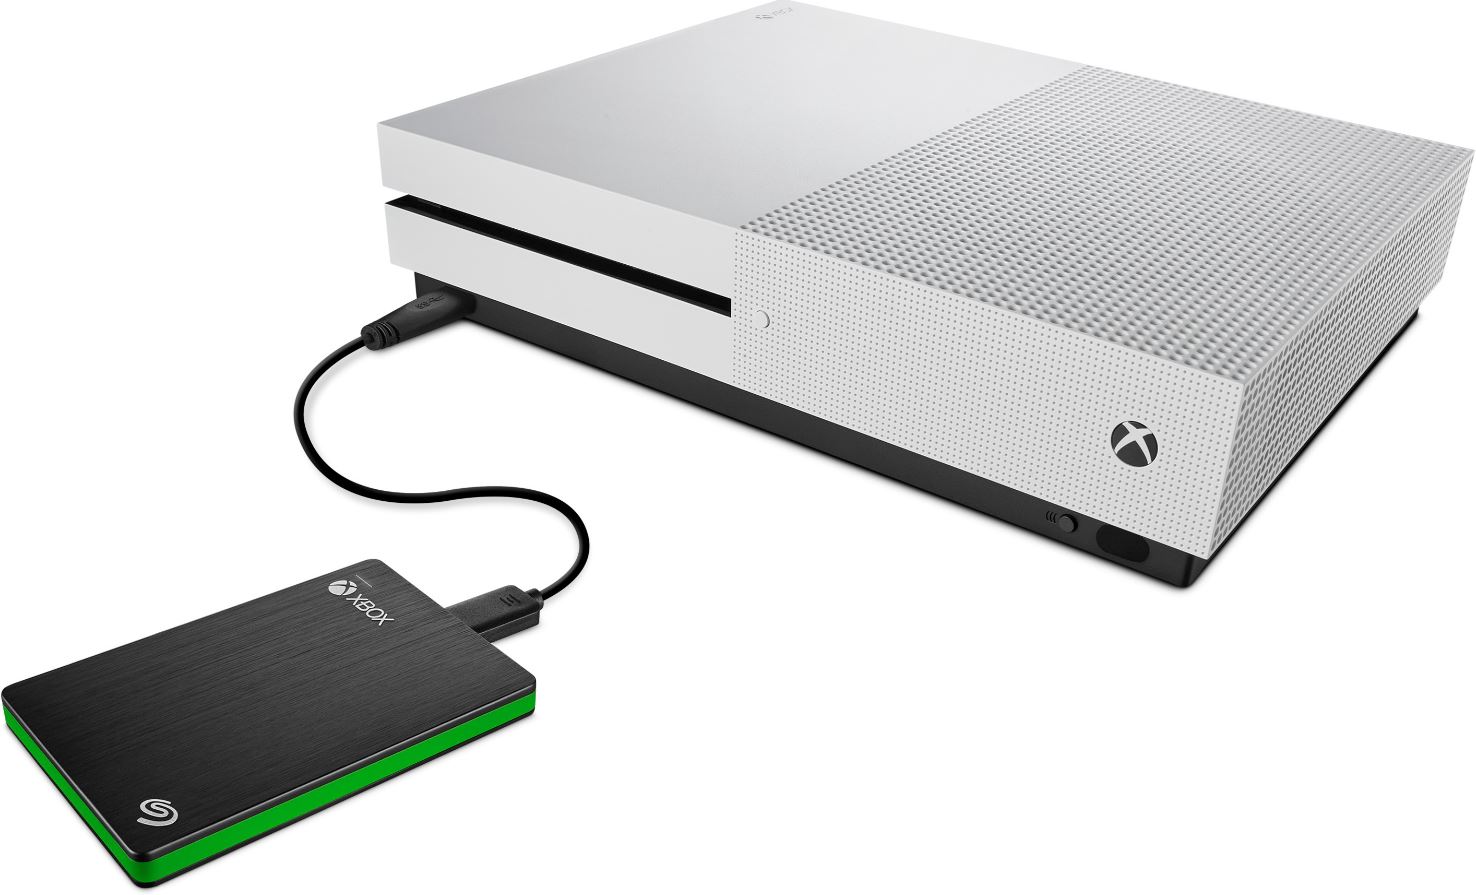 How To Use External Hard Drive On Xbox Series S